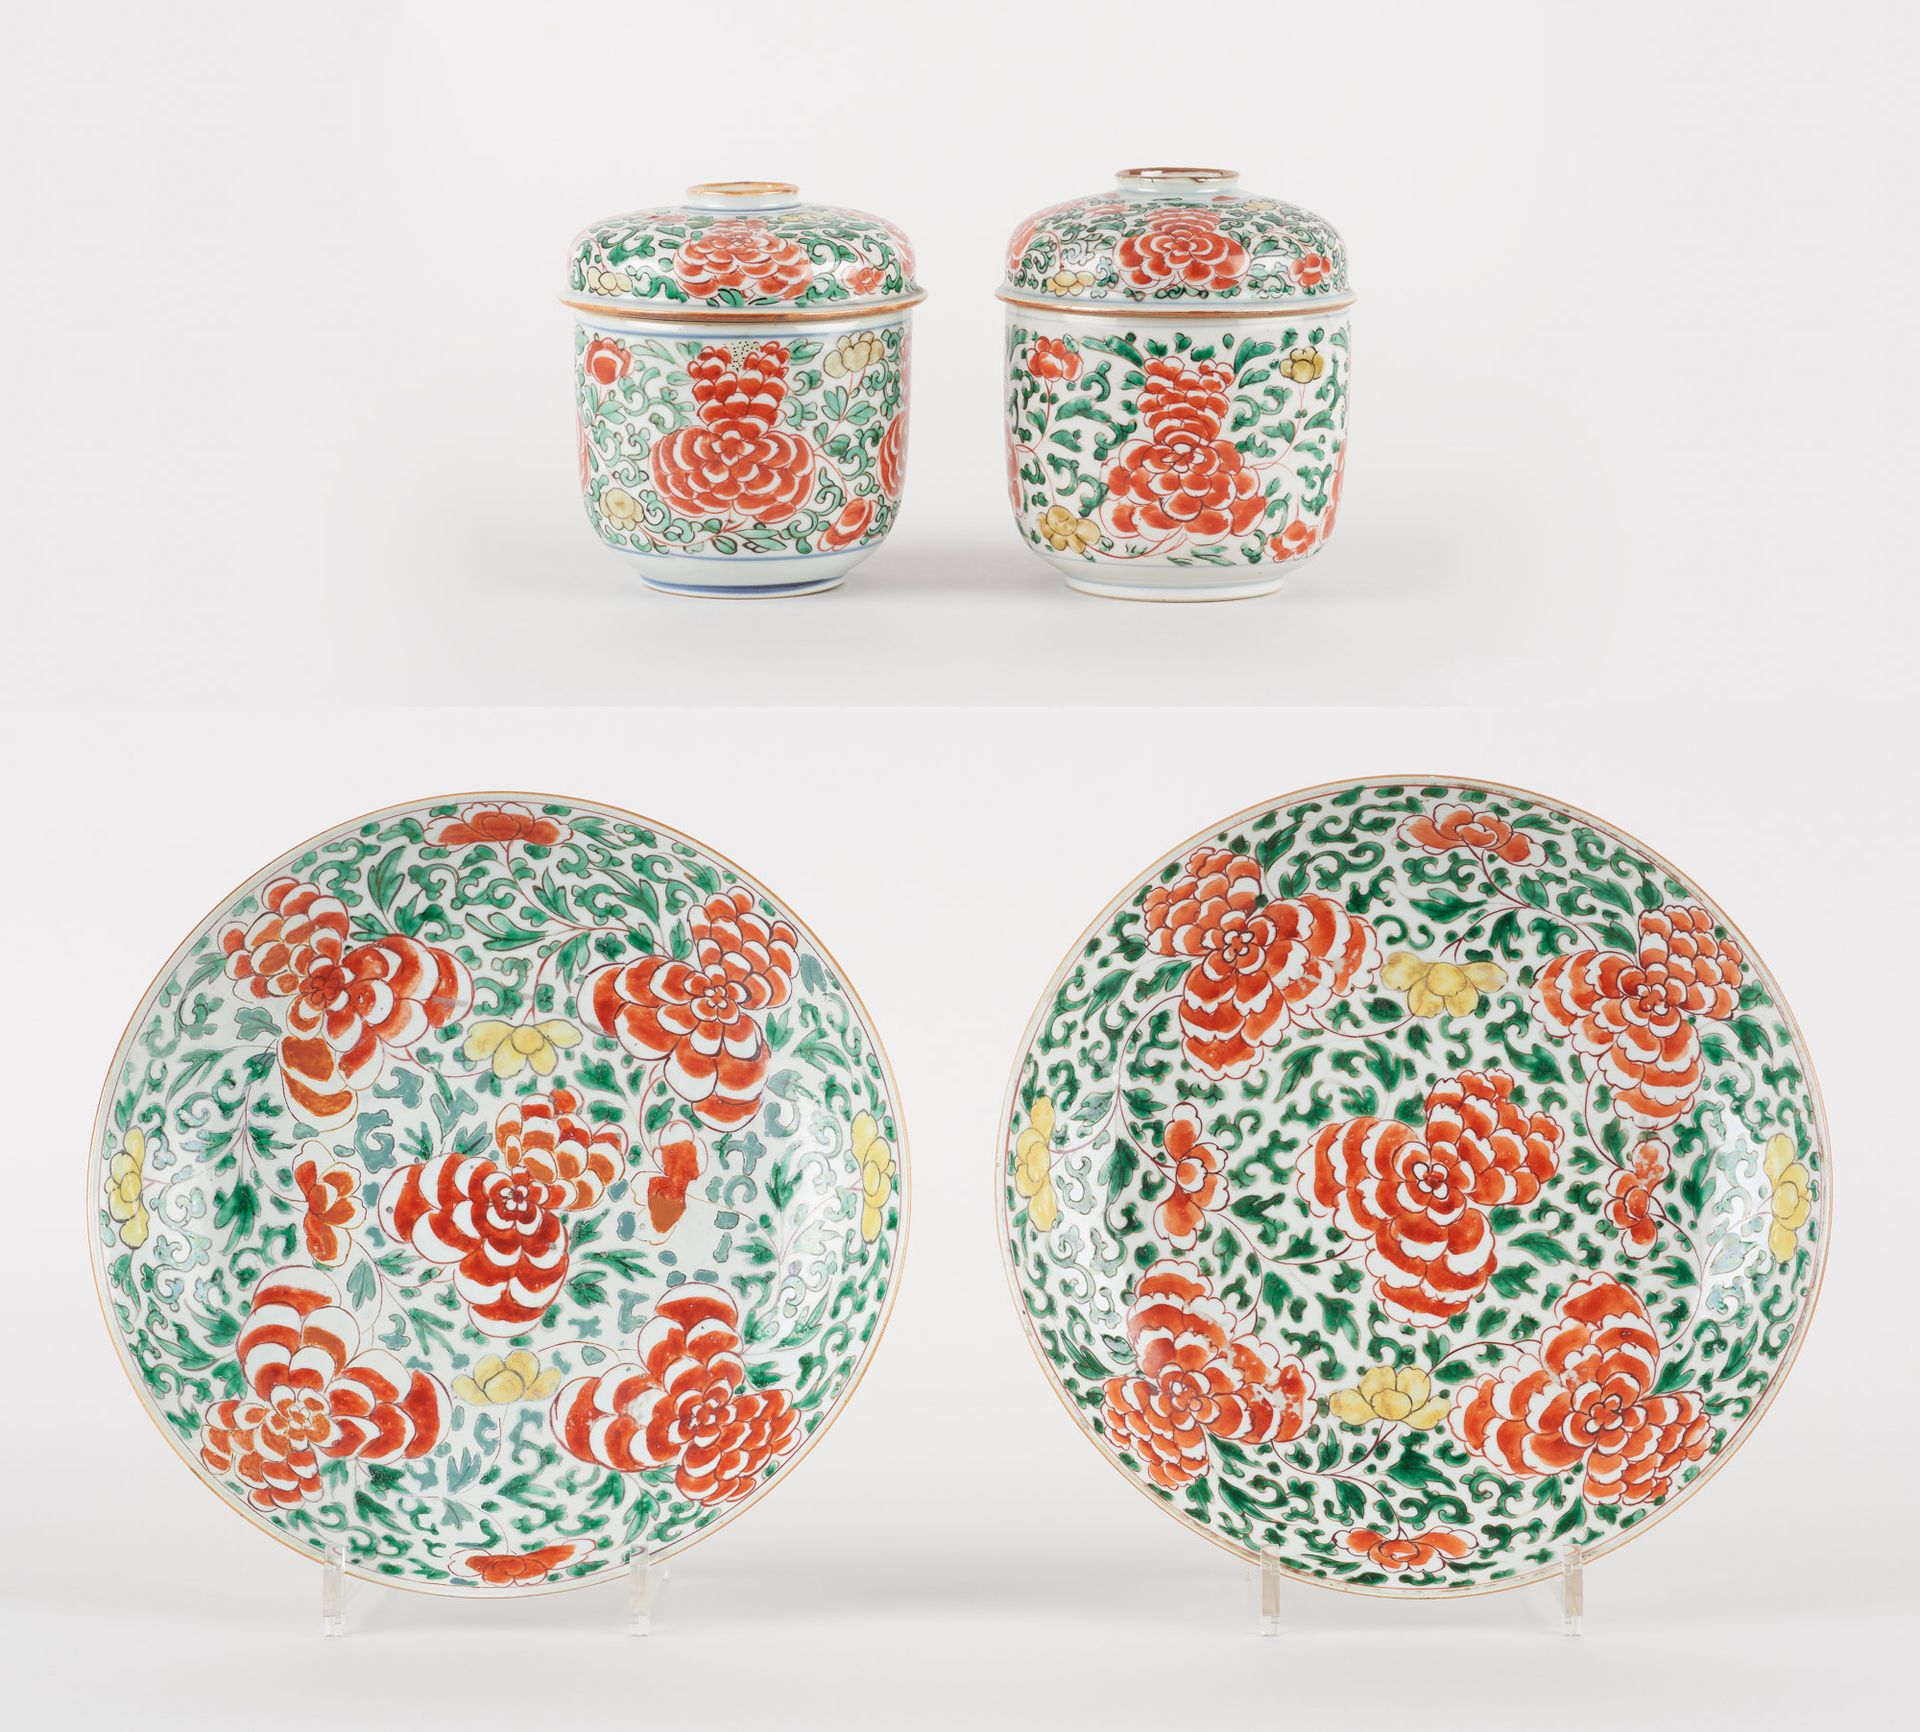 Travail chinois. Ceramics: Lot consisting of two polychrome porcelain plates wit&hellip;